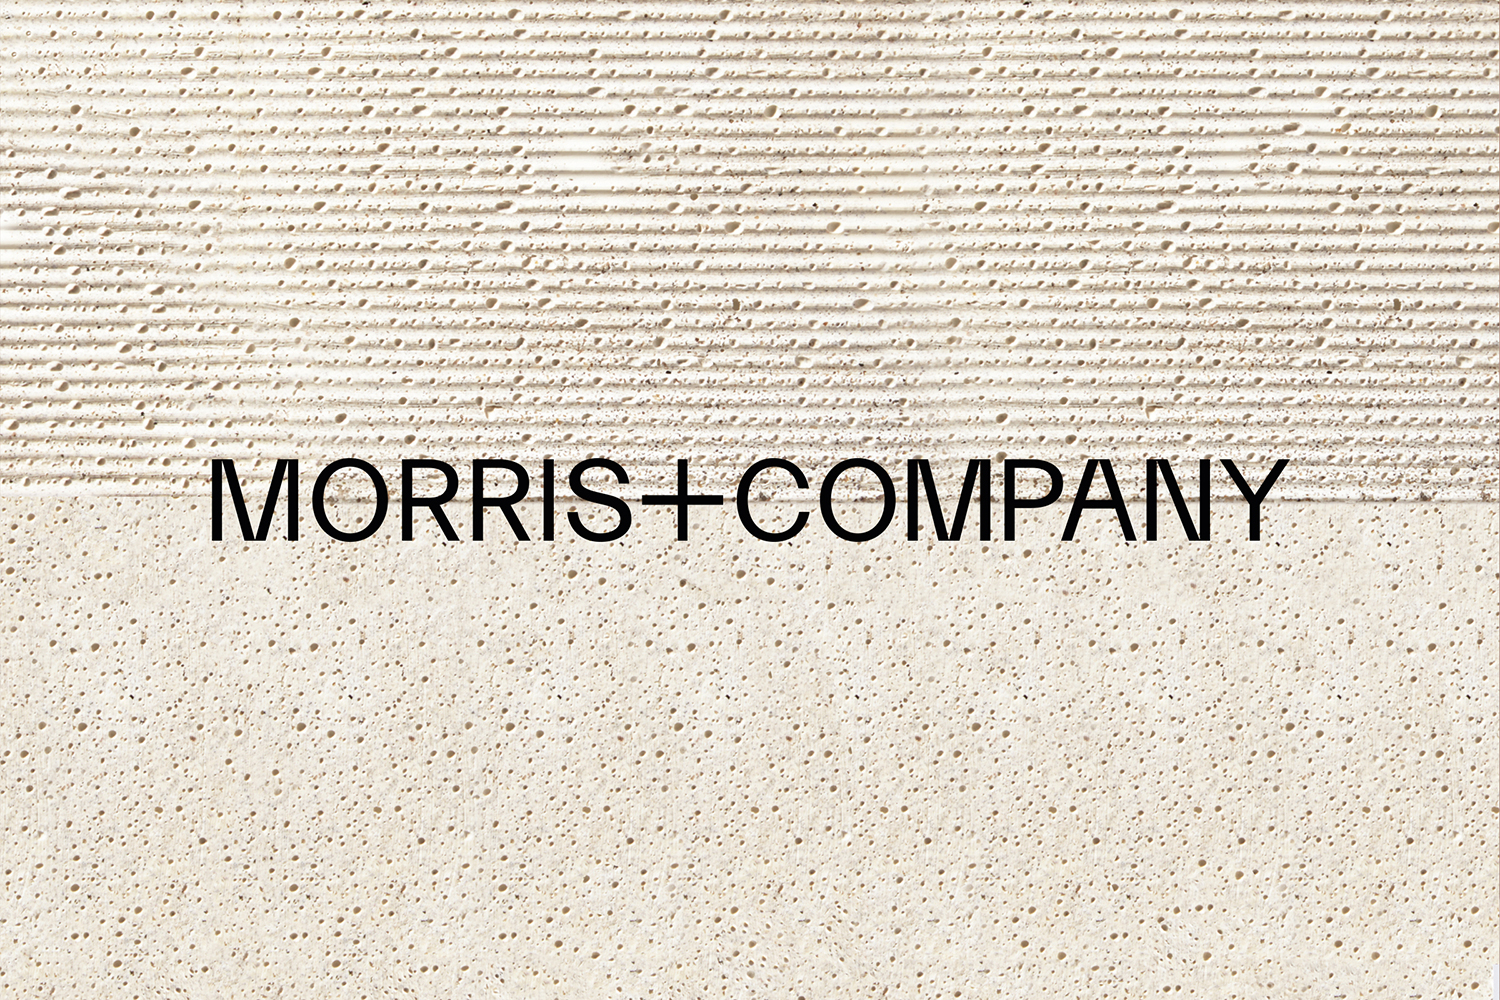 Naming, logotype, tote bags, stationery, brand guiedlines and brochures by Bob Design for architectural practice Morris+Company